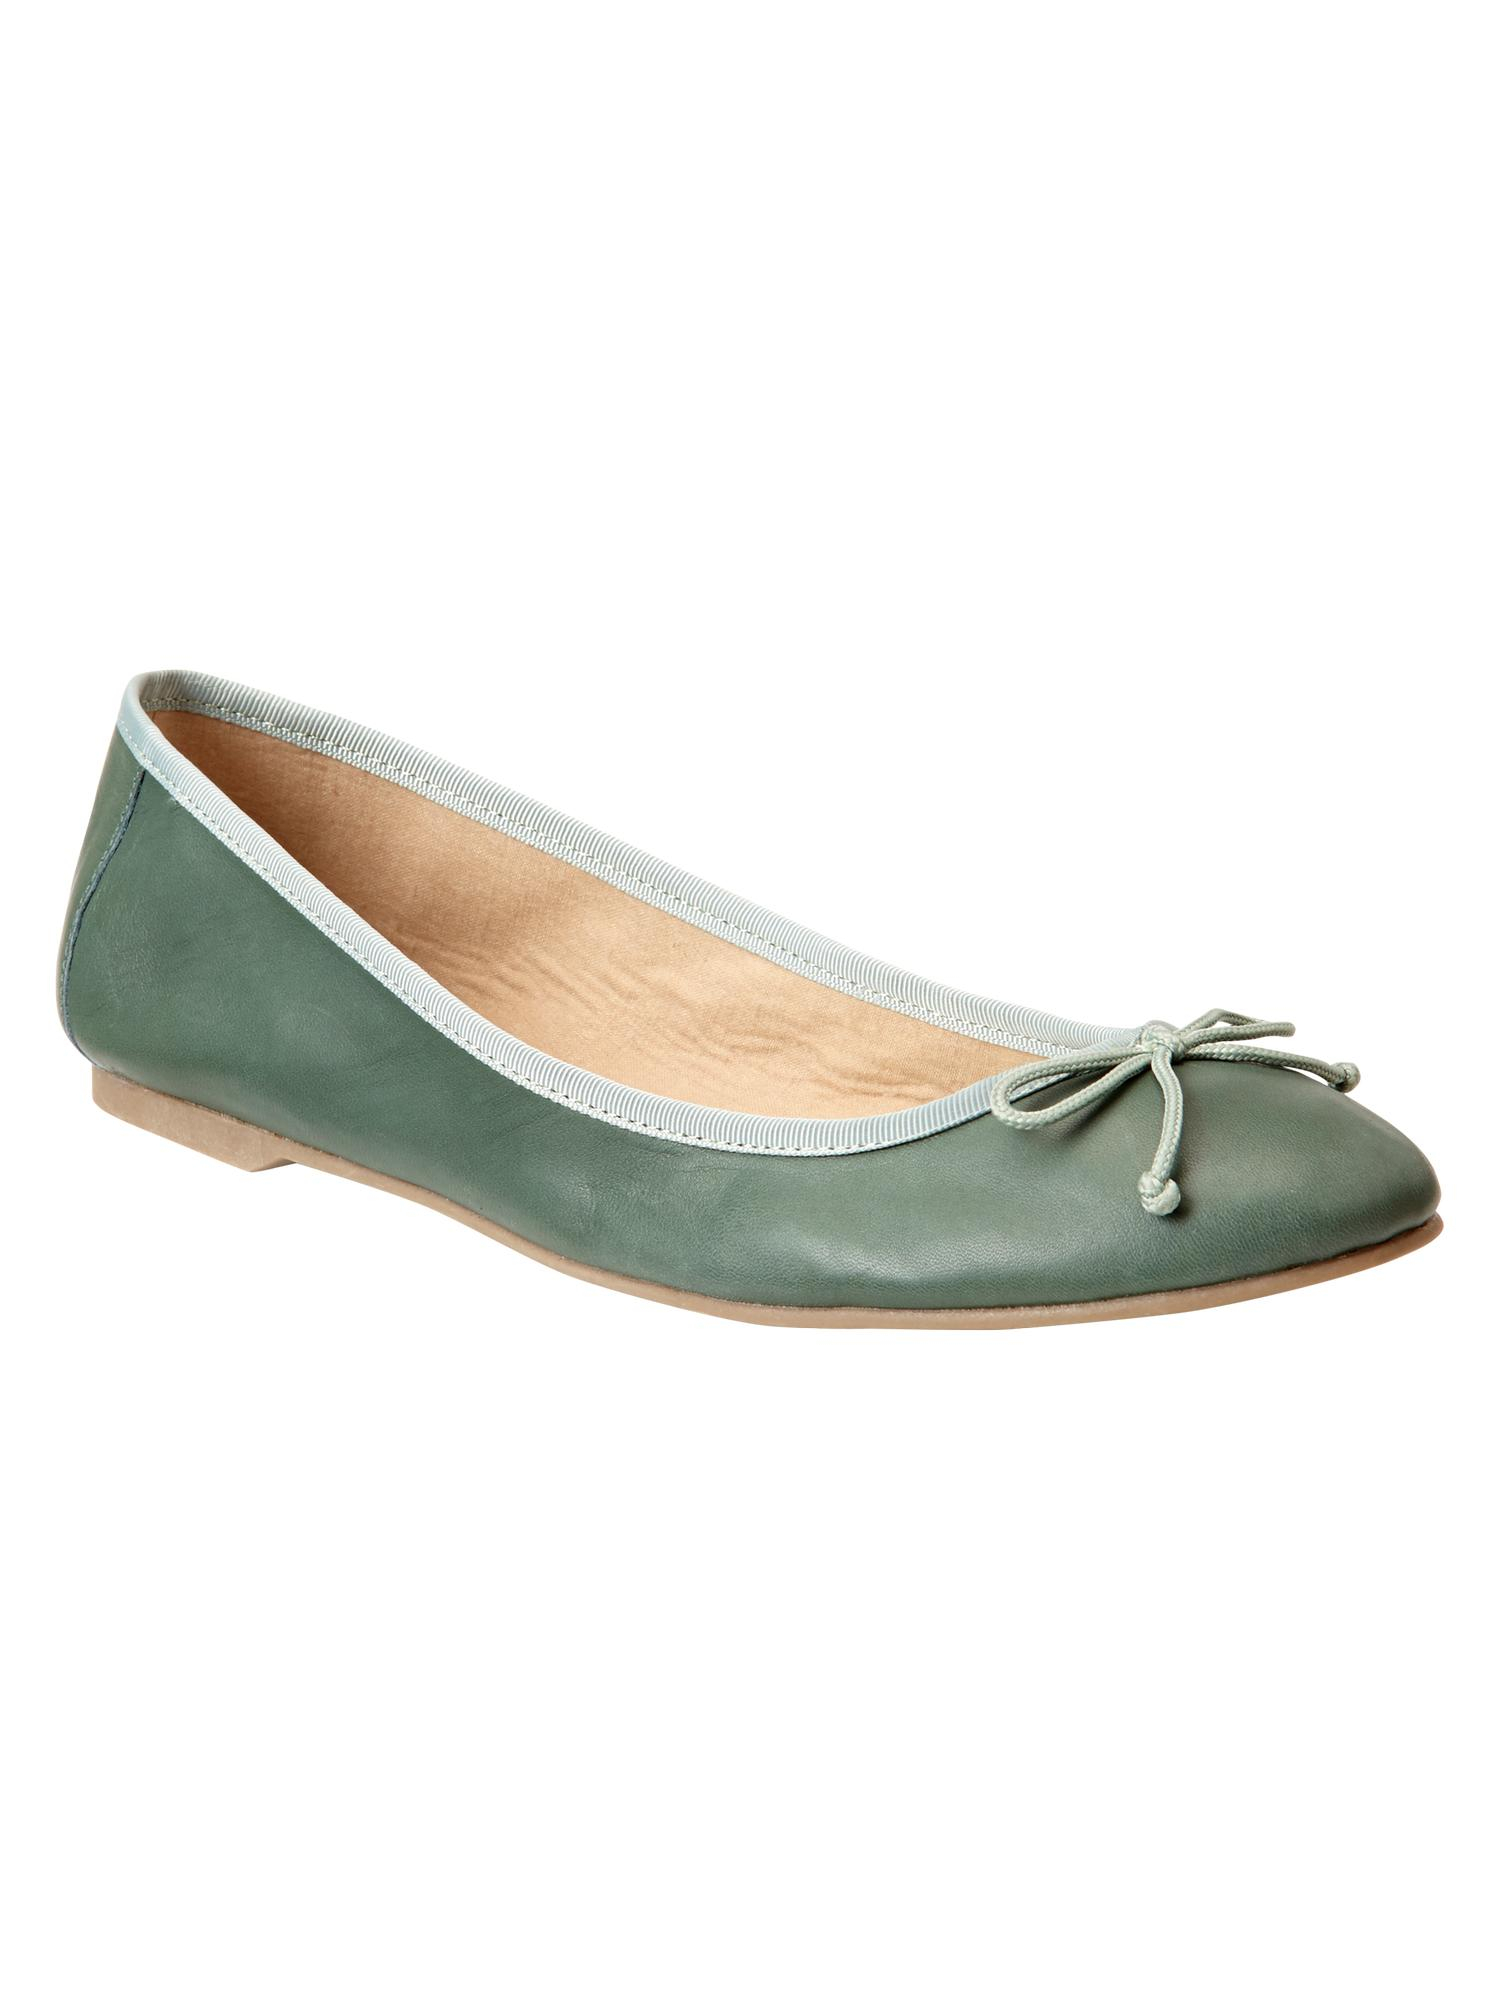 Gap Classic Leather Ballet Flats in Green (district green)